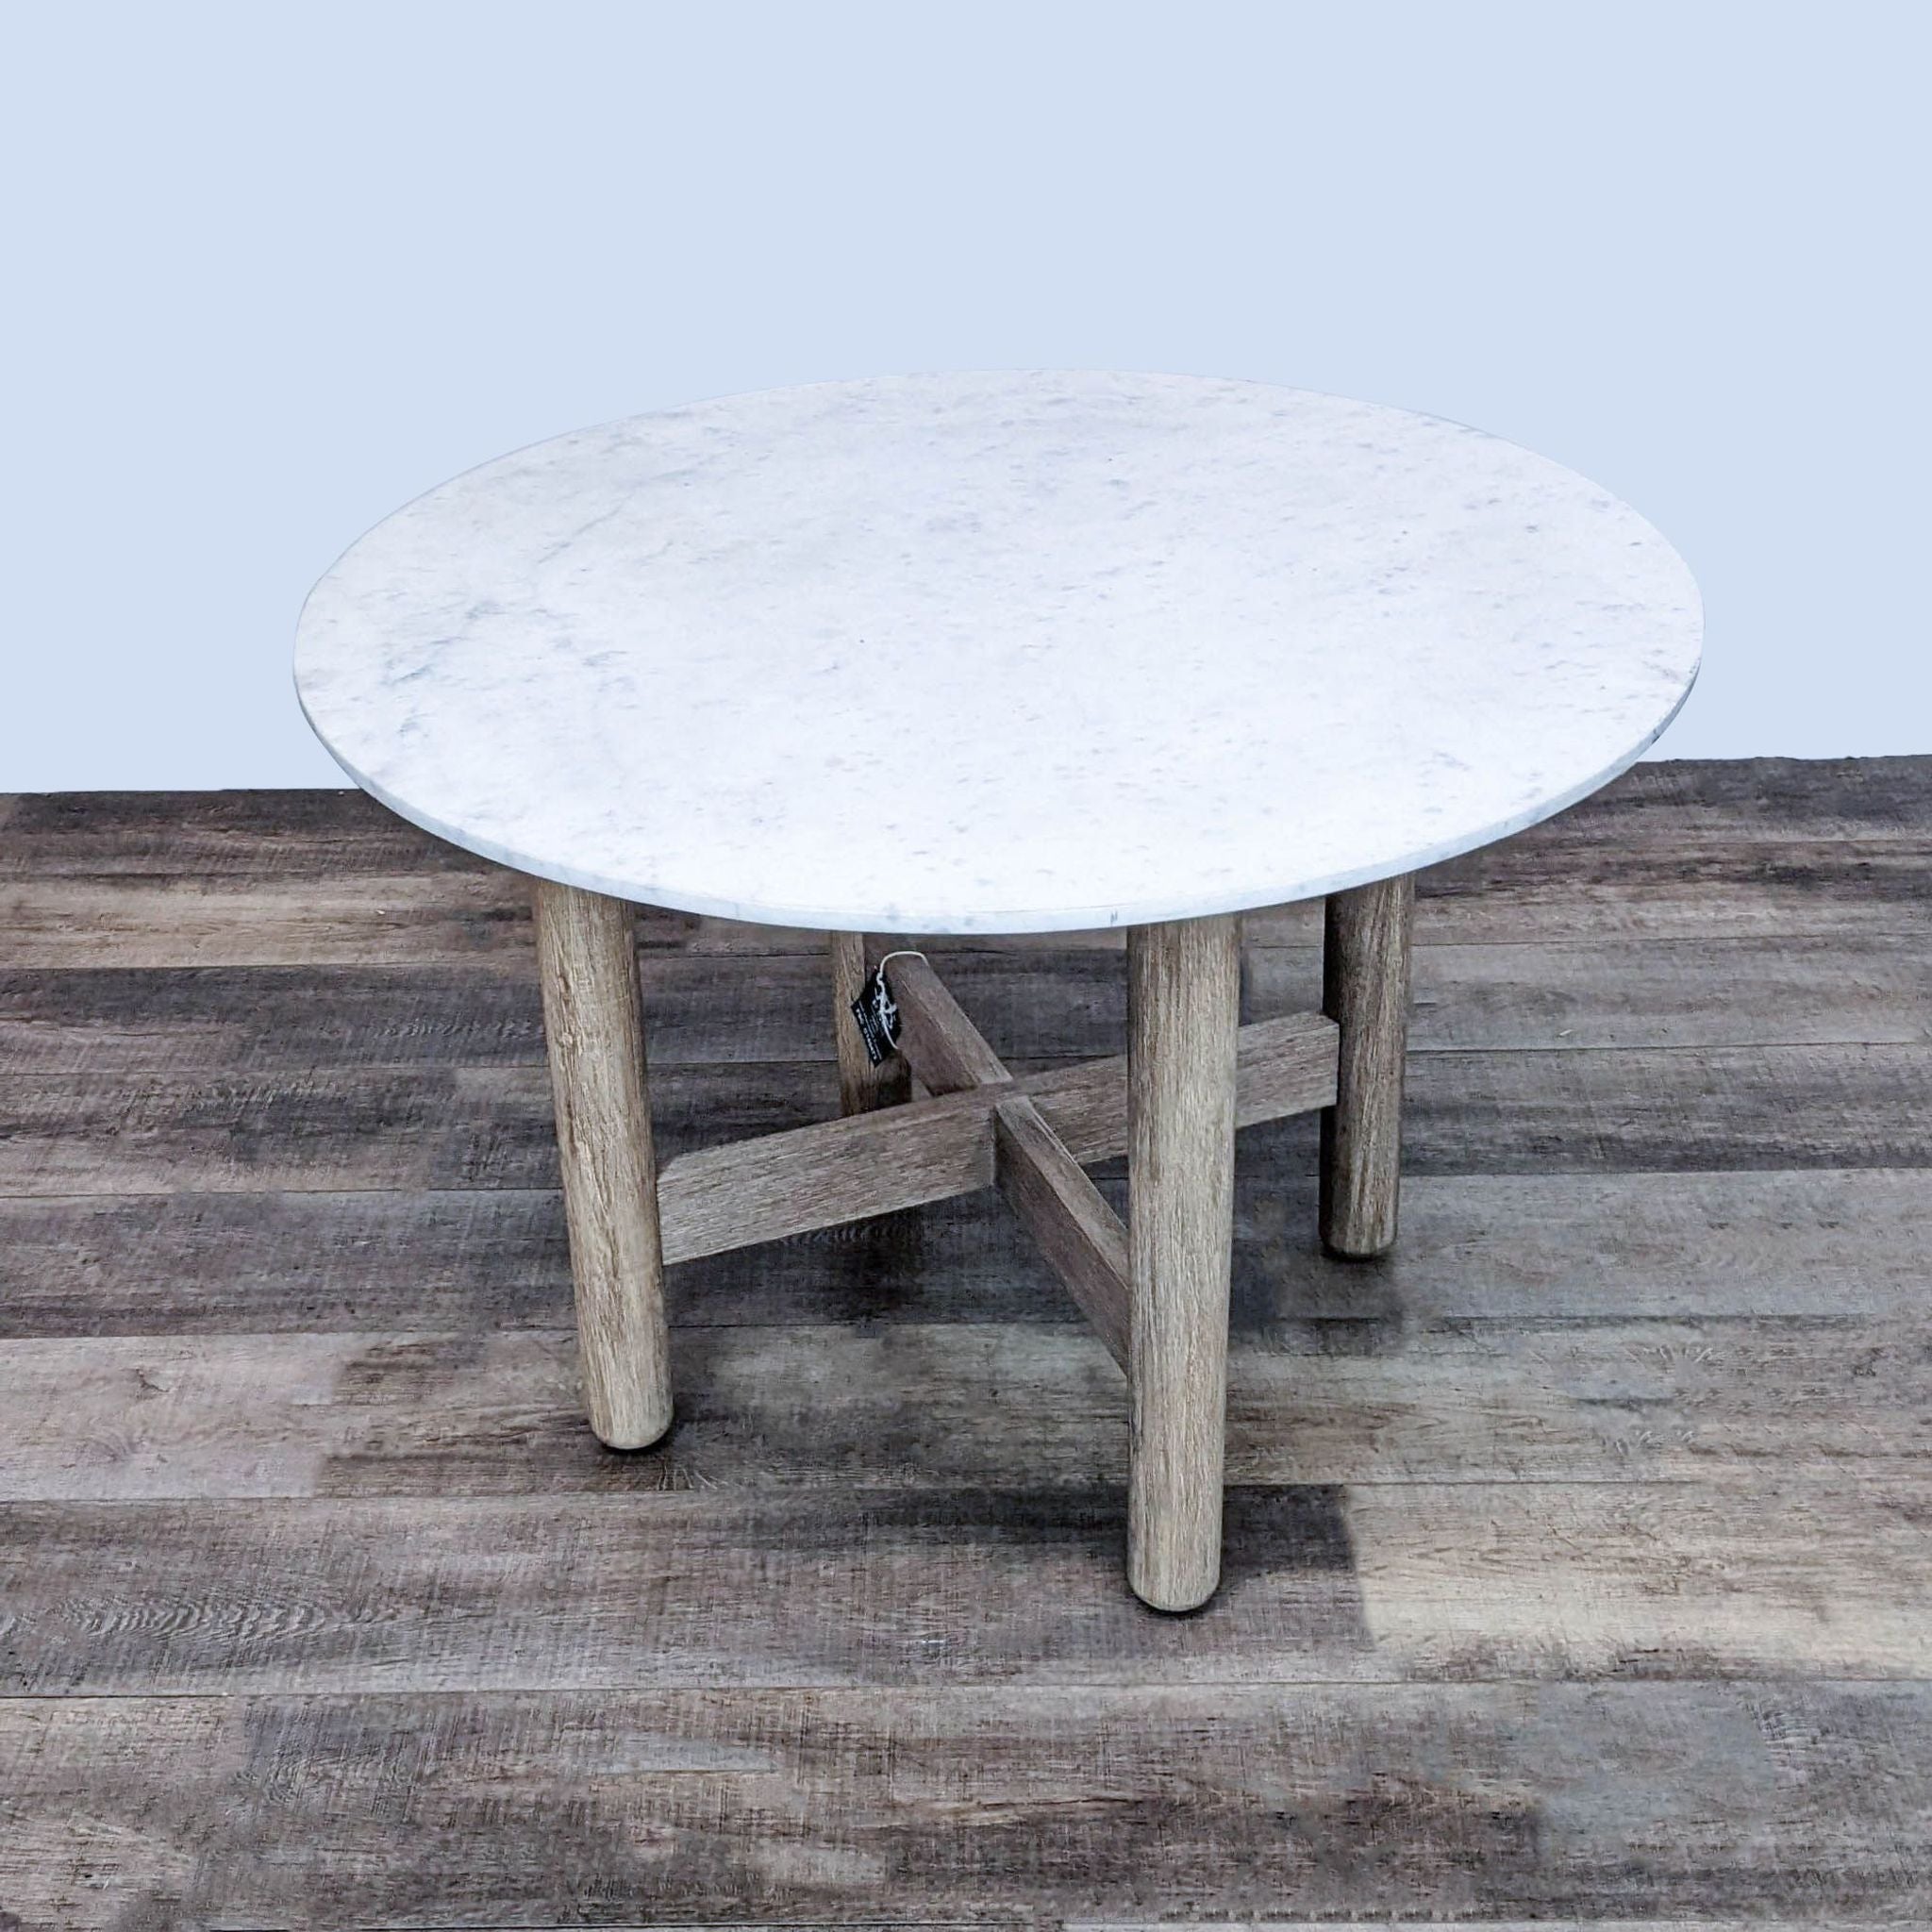 Round marble-top Hargrove table with robust wooden base paired with four wooden Berkshire chairs by West Elm.